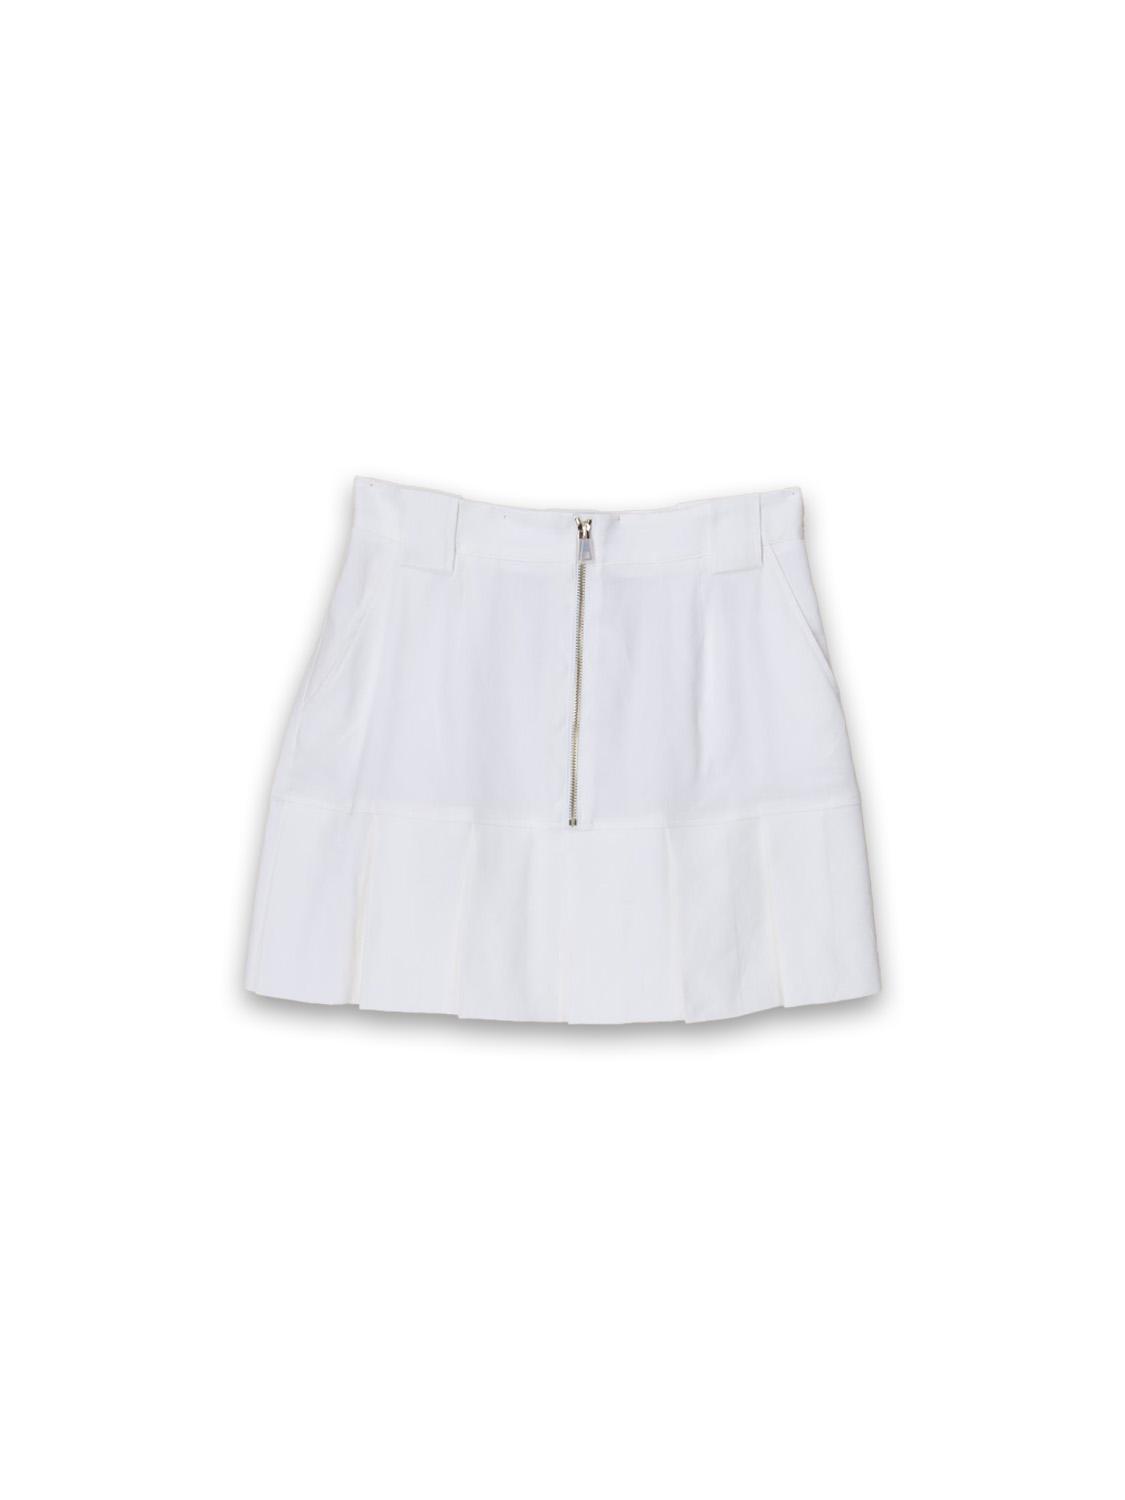 Stretchy mini skirt with zipper detail 